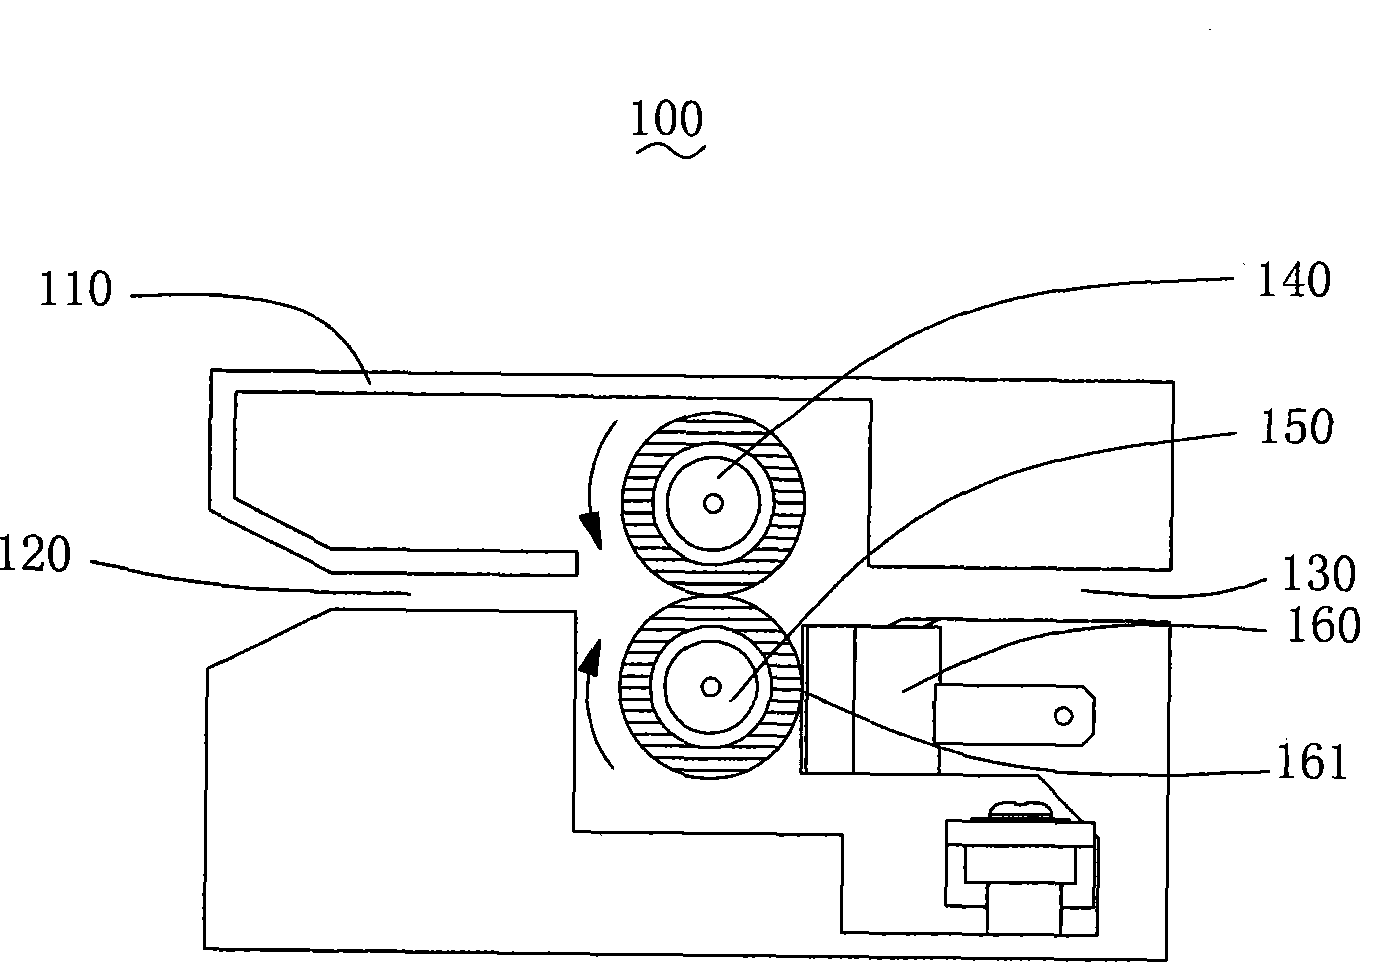 Gluer, temperature control device and heat conduction mechanism